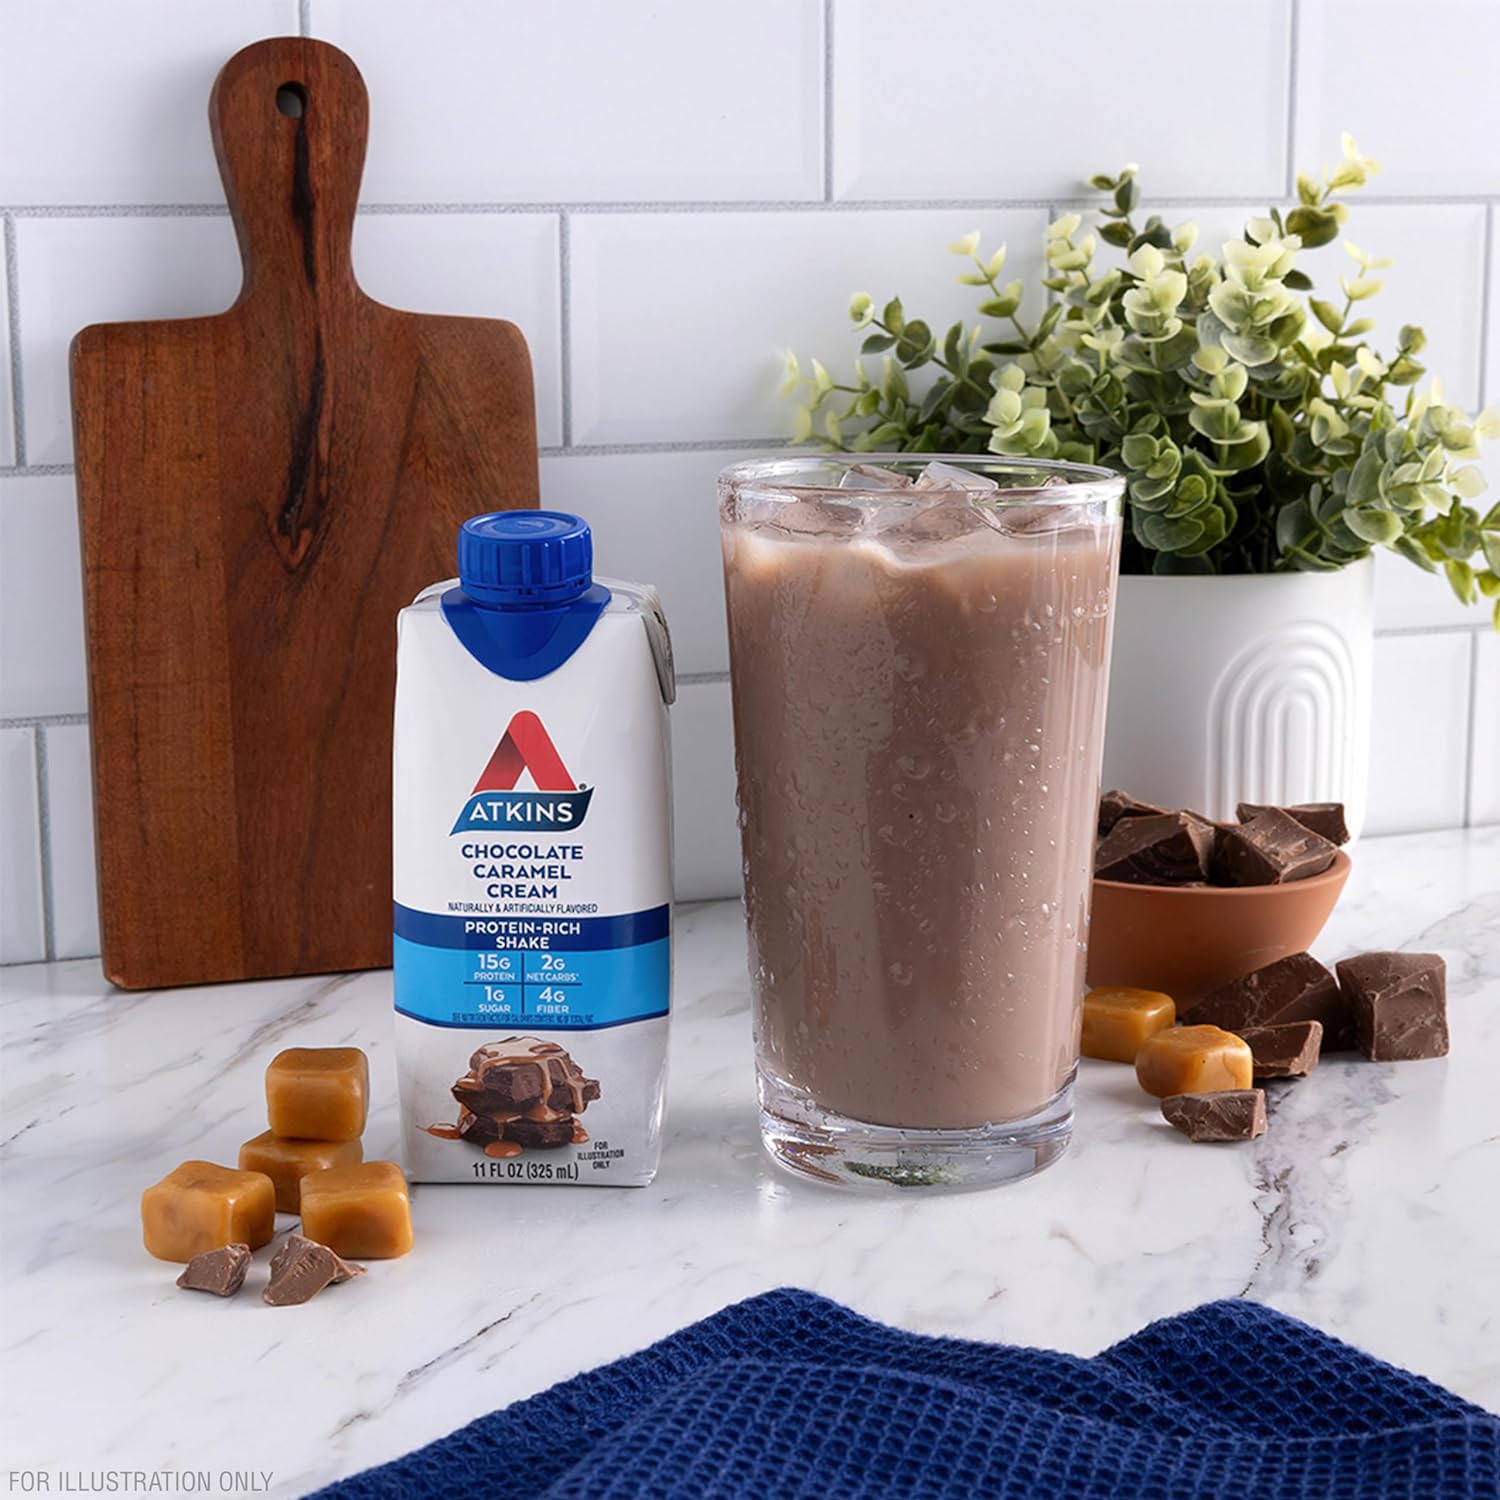 Atkins Protein Rich Shake, Chocolate Caramel Cream, 15g Protein, Low Glycemic, 2g Net Carbs, 1g Sugar, Low Carb Lifestyle, Gluten Free, 12 count : Grocery & Gourmet Food